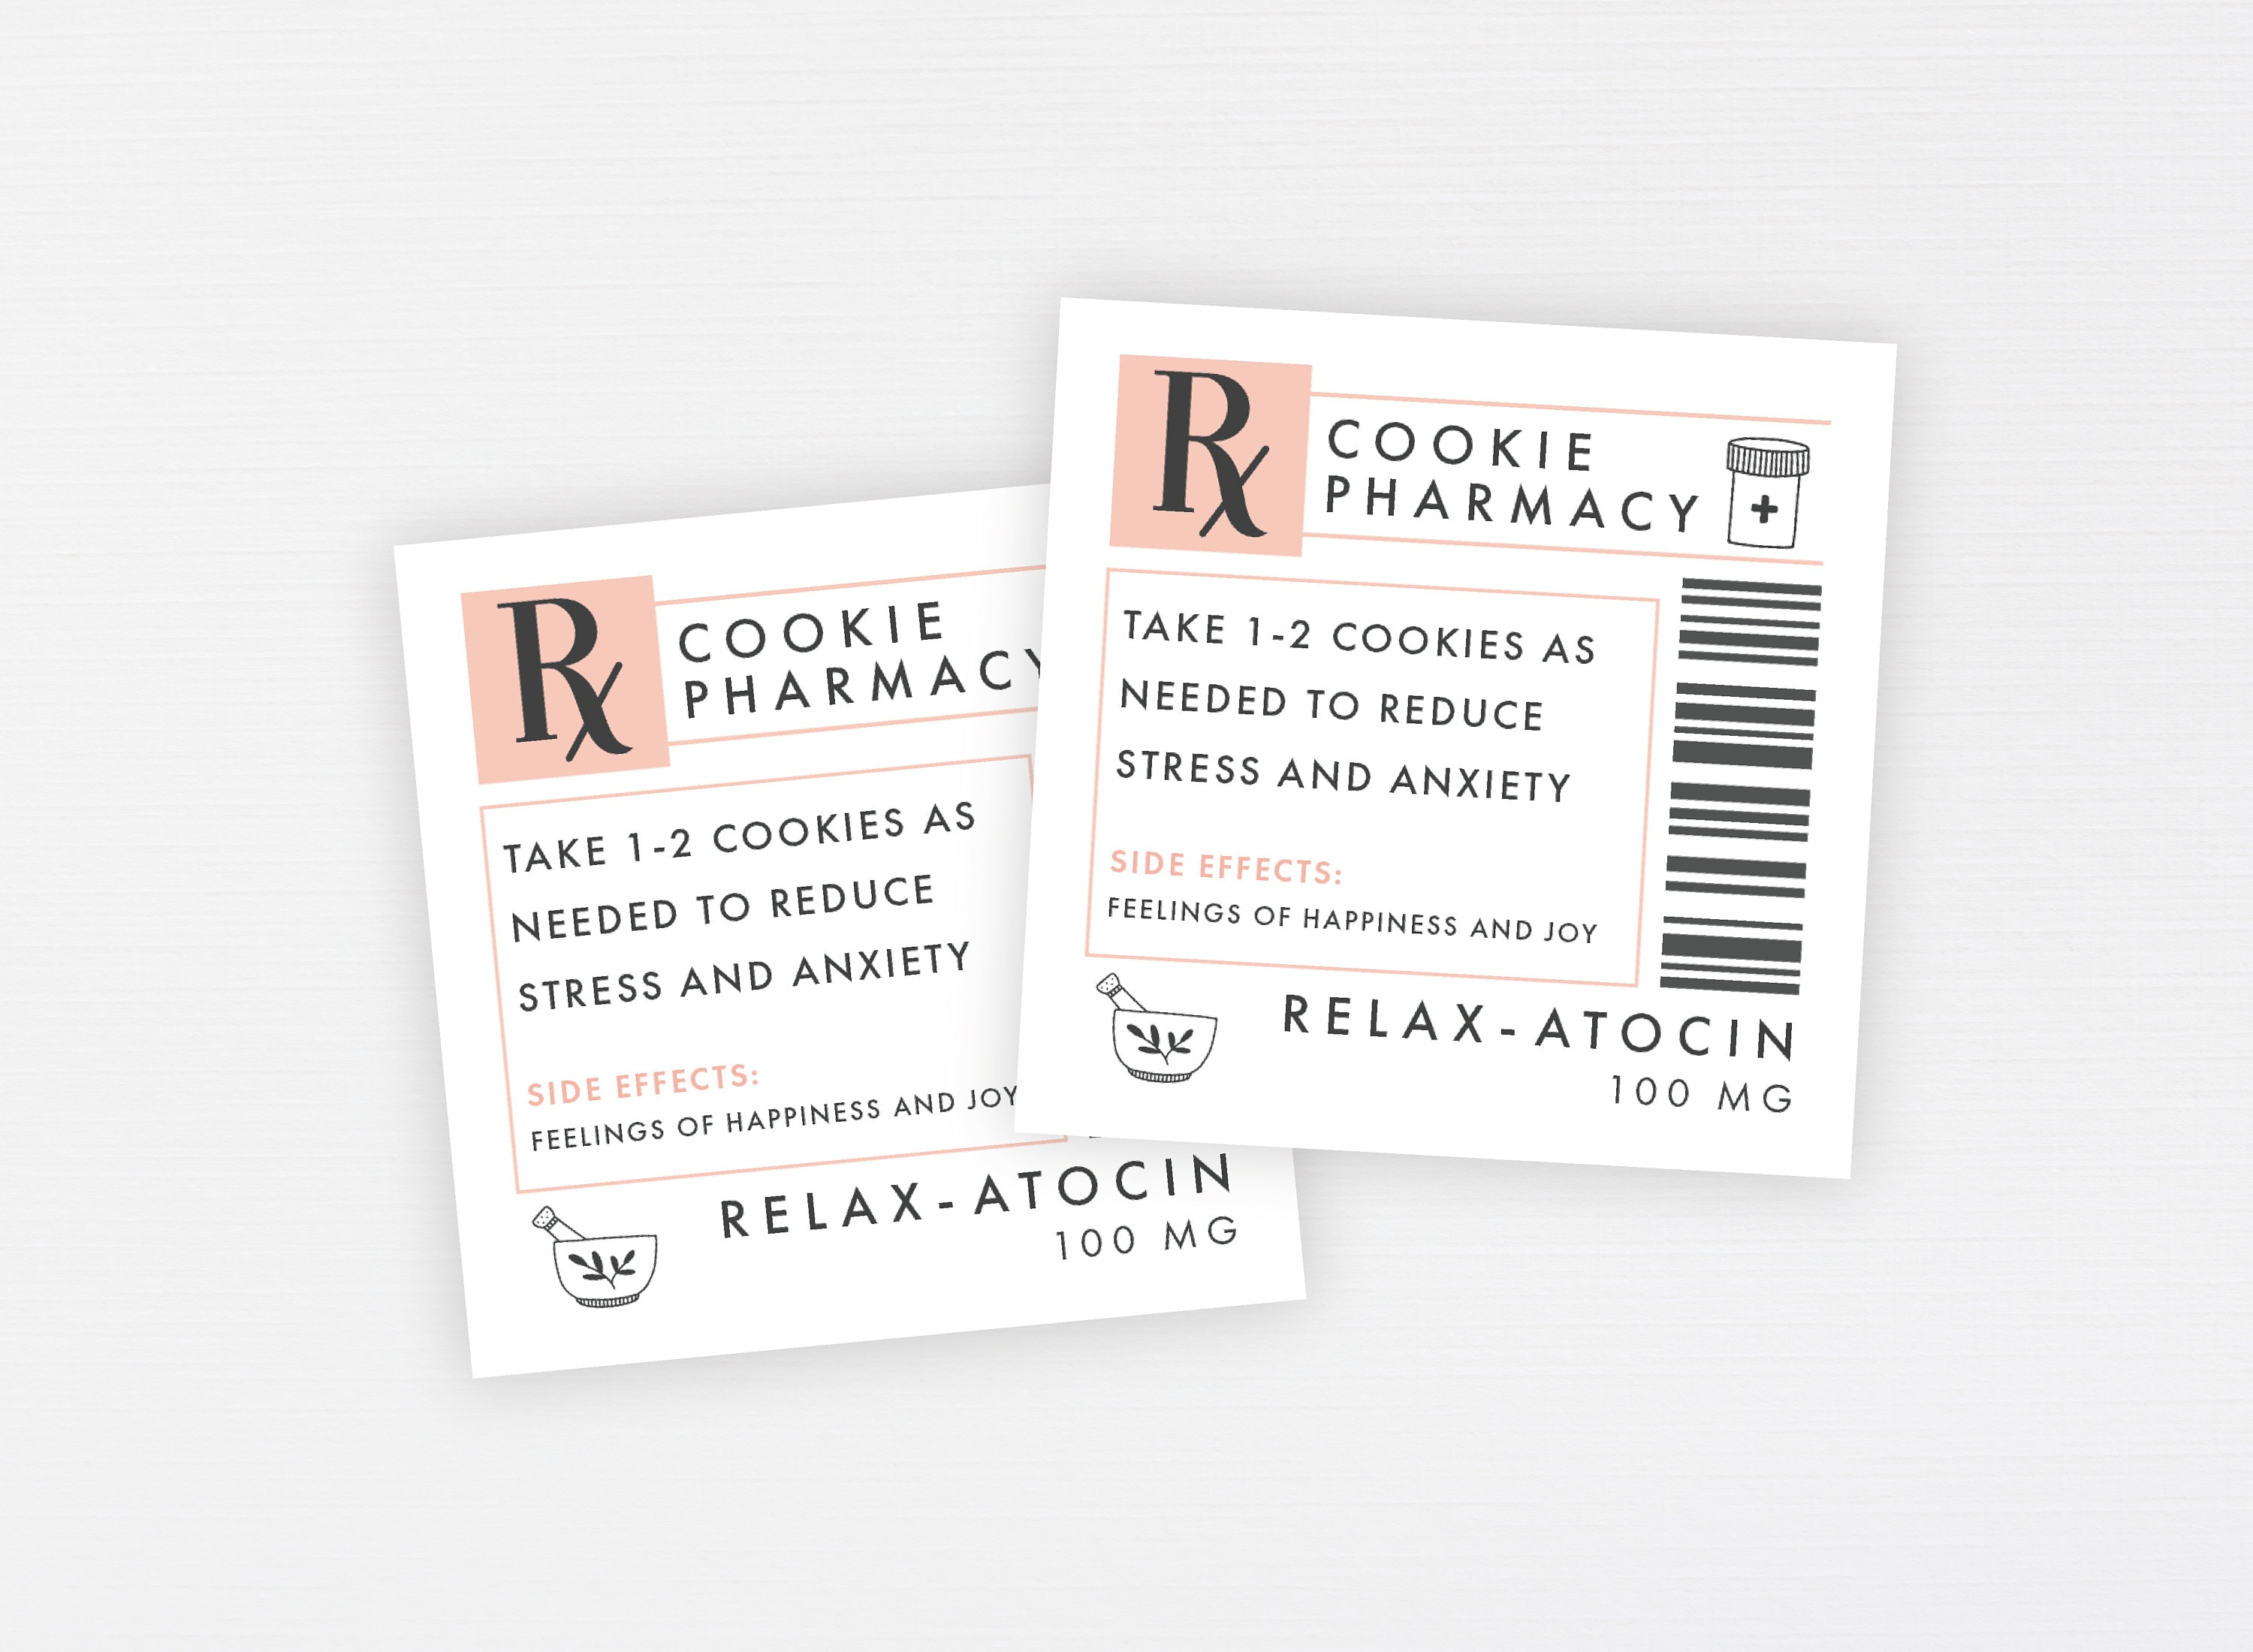 Rexulti copay card covers generics too : r/pharmacy